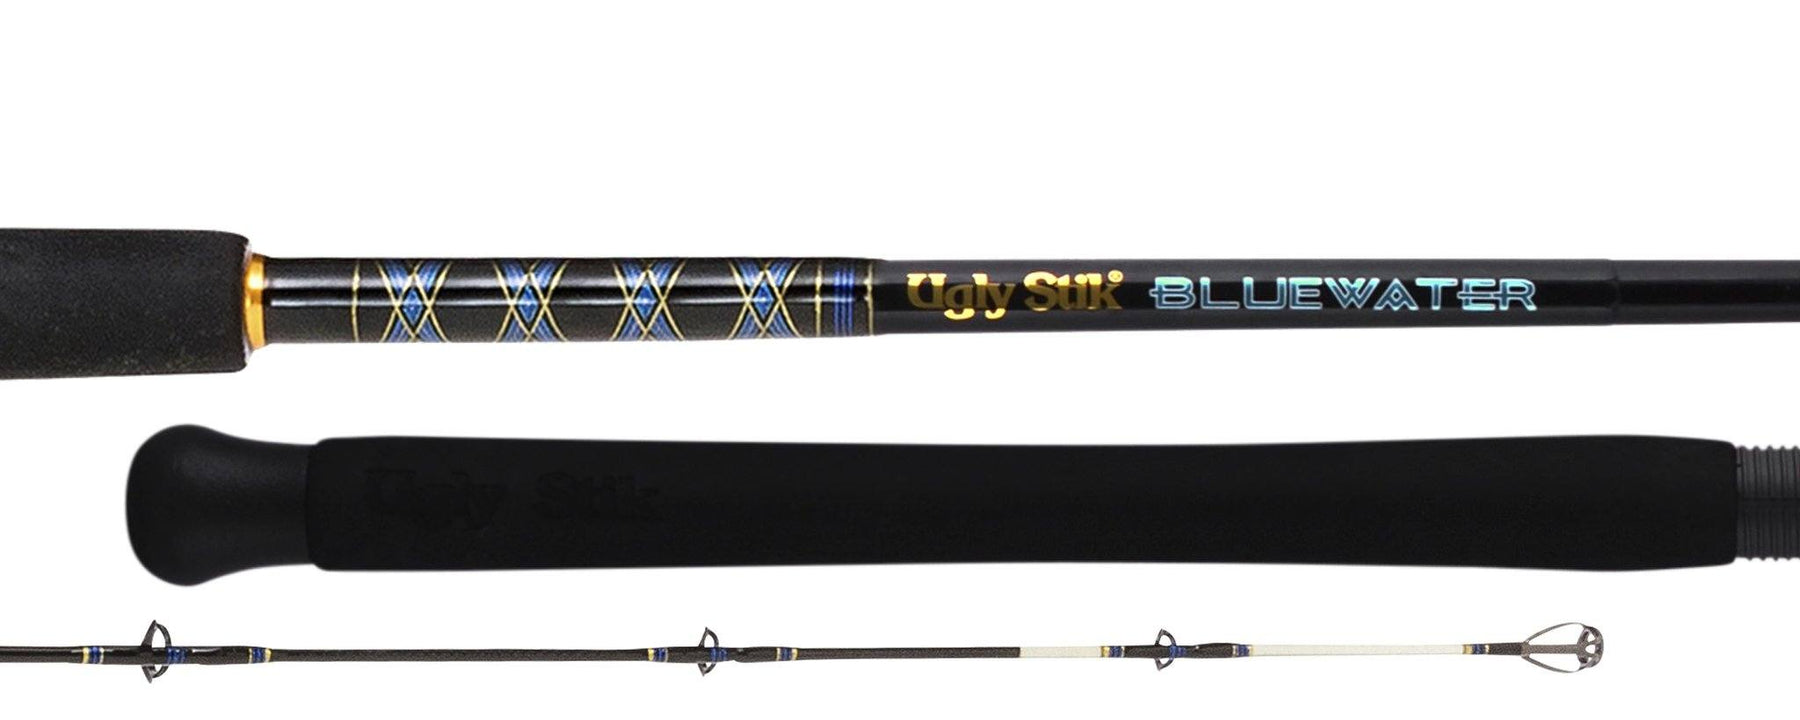 Ugly Stik Bluewater Series Rods